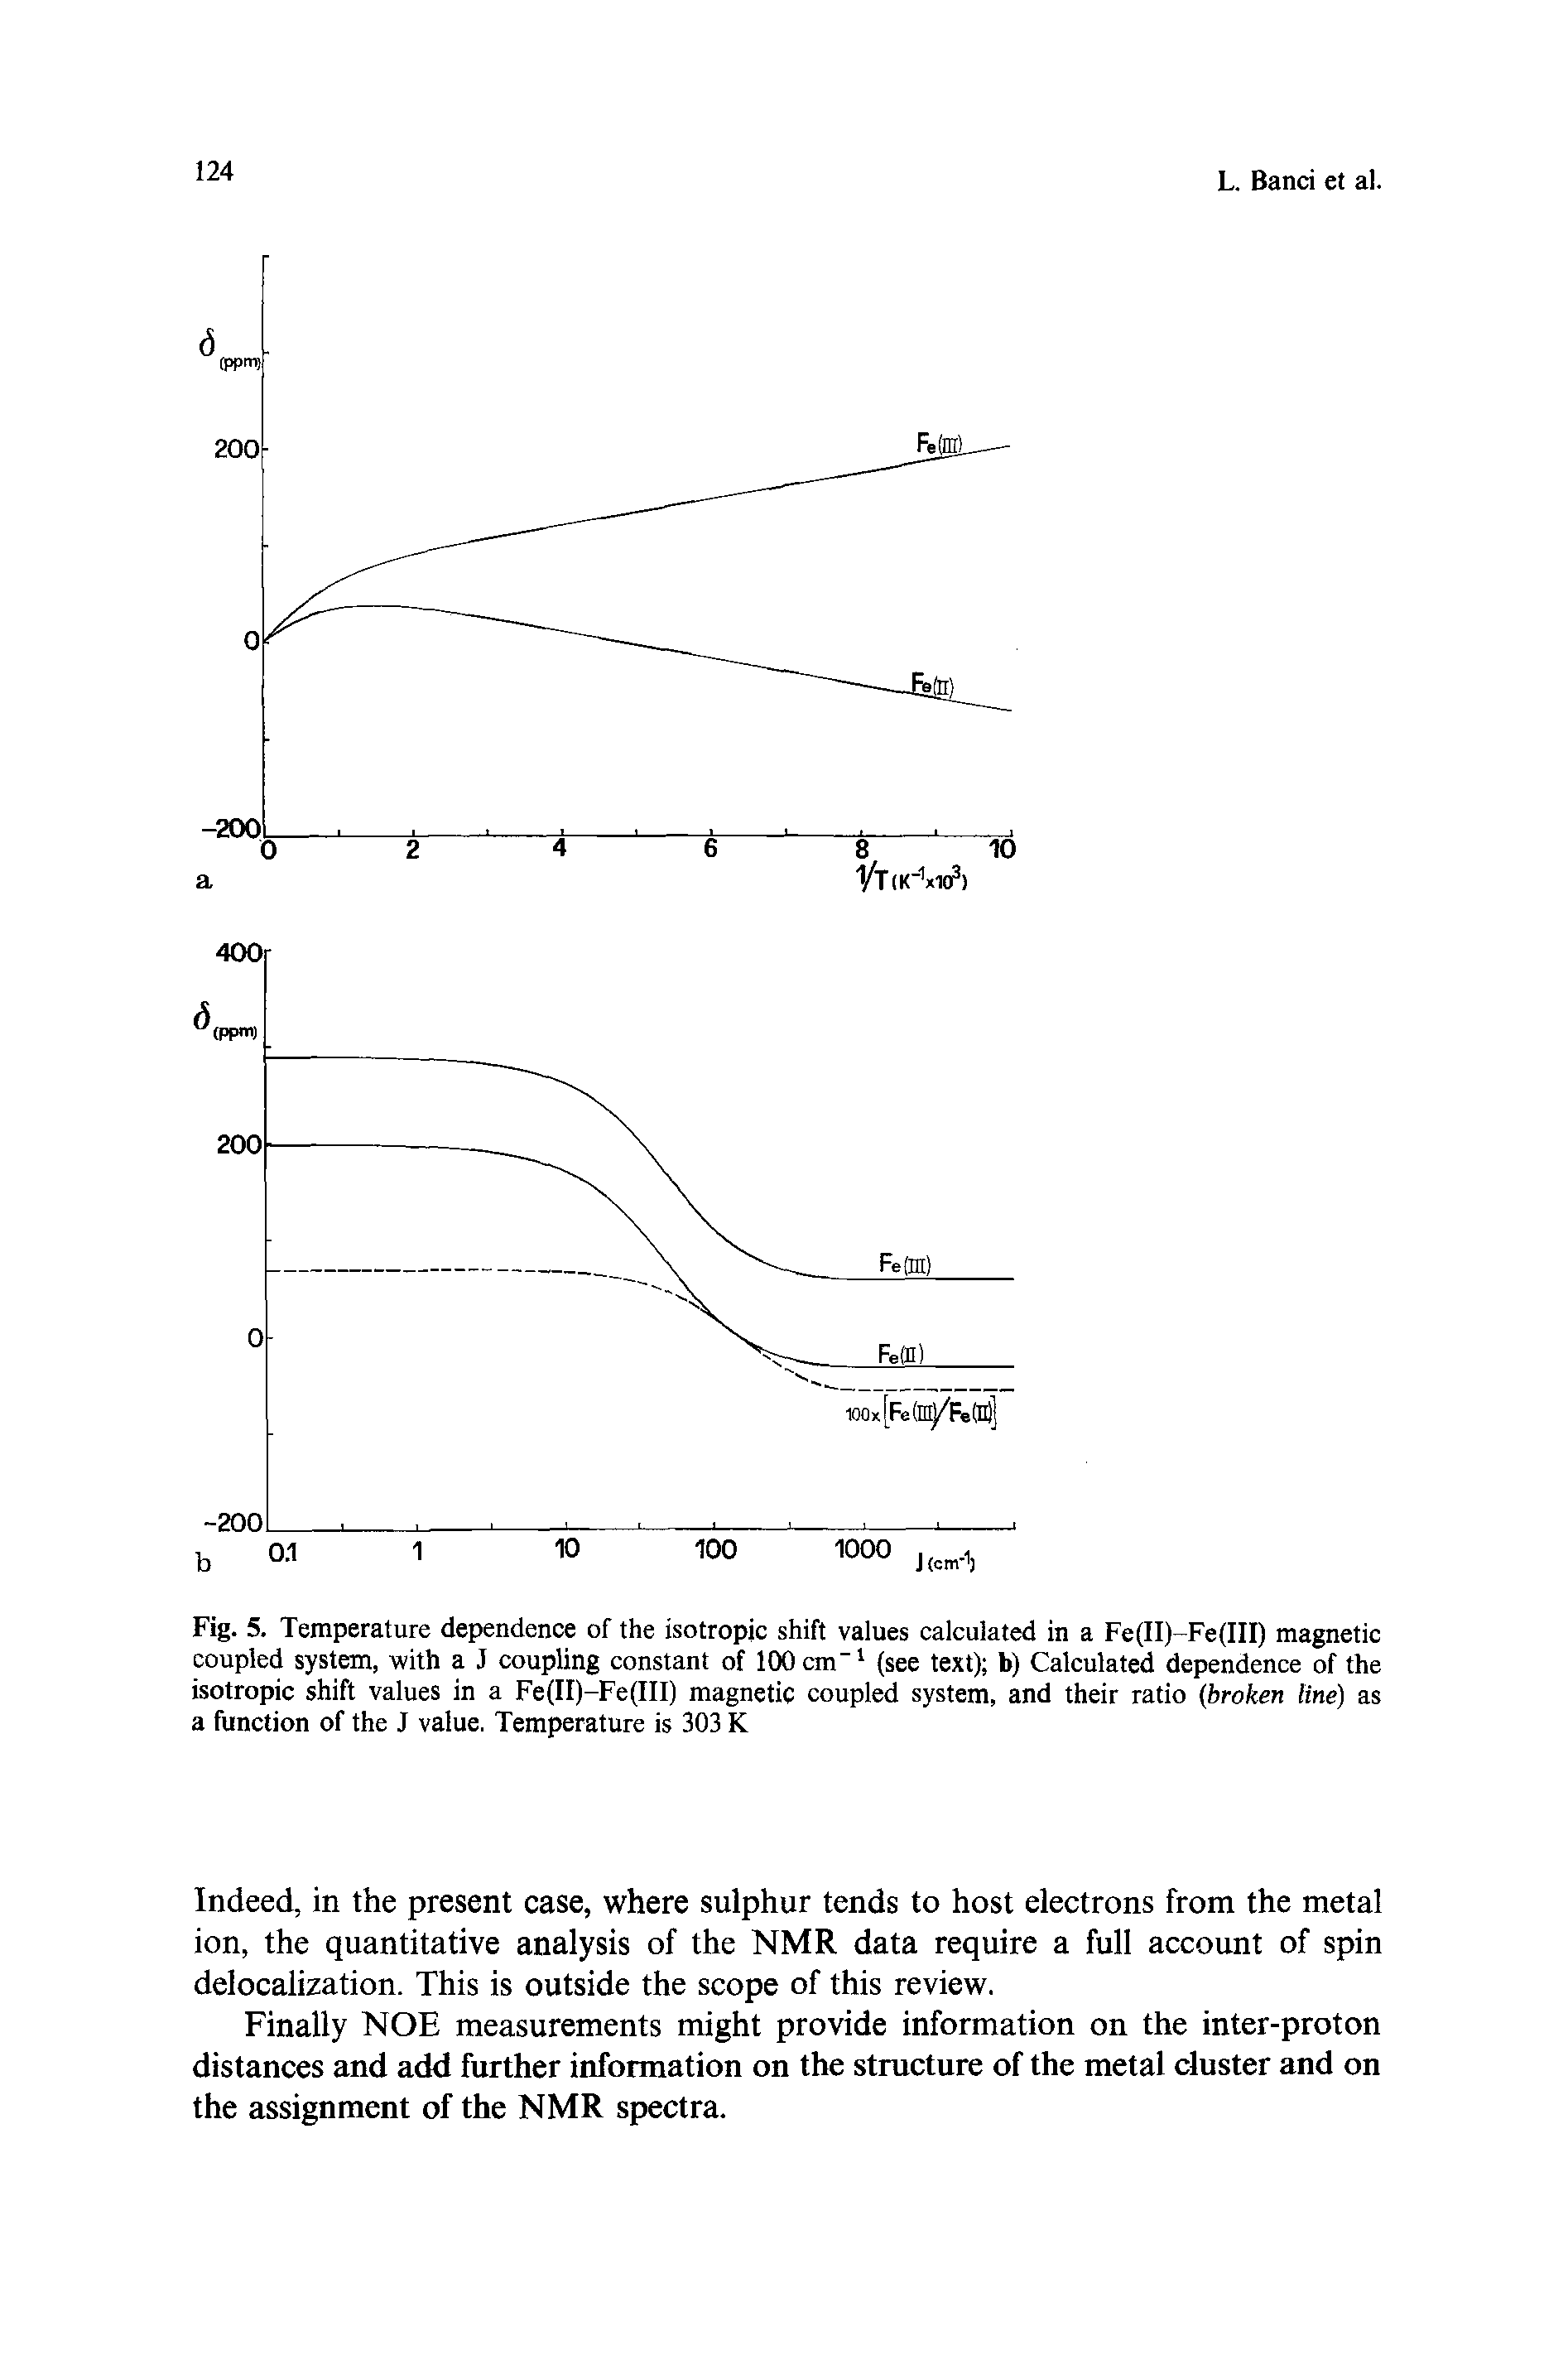 Fig. 5. Temperature dependence of the isotropic shift values calculated in a Fe(II)-Fe(III) magnetic coupled system, with a J coupling constant of 100 cm" (see text) b) Calculated dependence of the isotropic shift values in a Fe(II)-Fe(III) magnetic coupled system, and their ratio broken line) as a function of the J value. Temperature is 303 K...